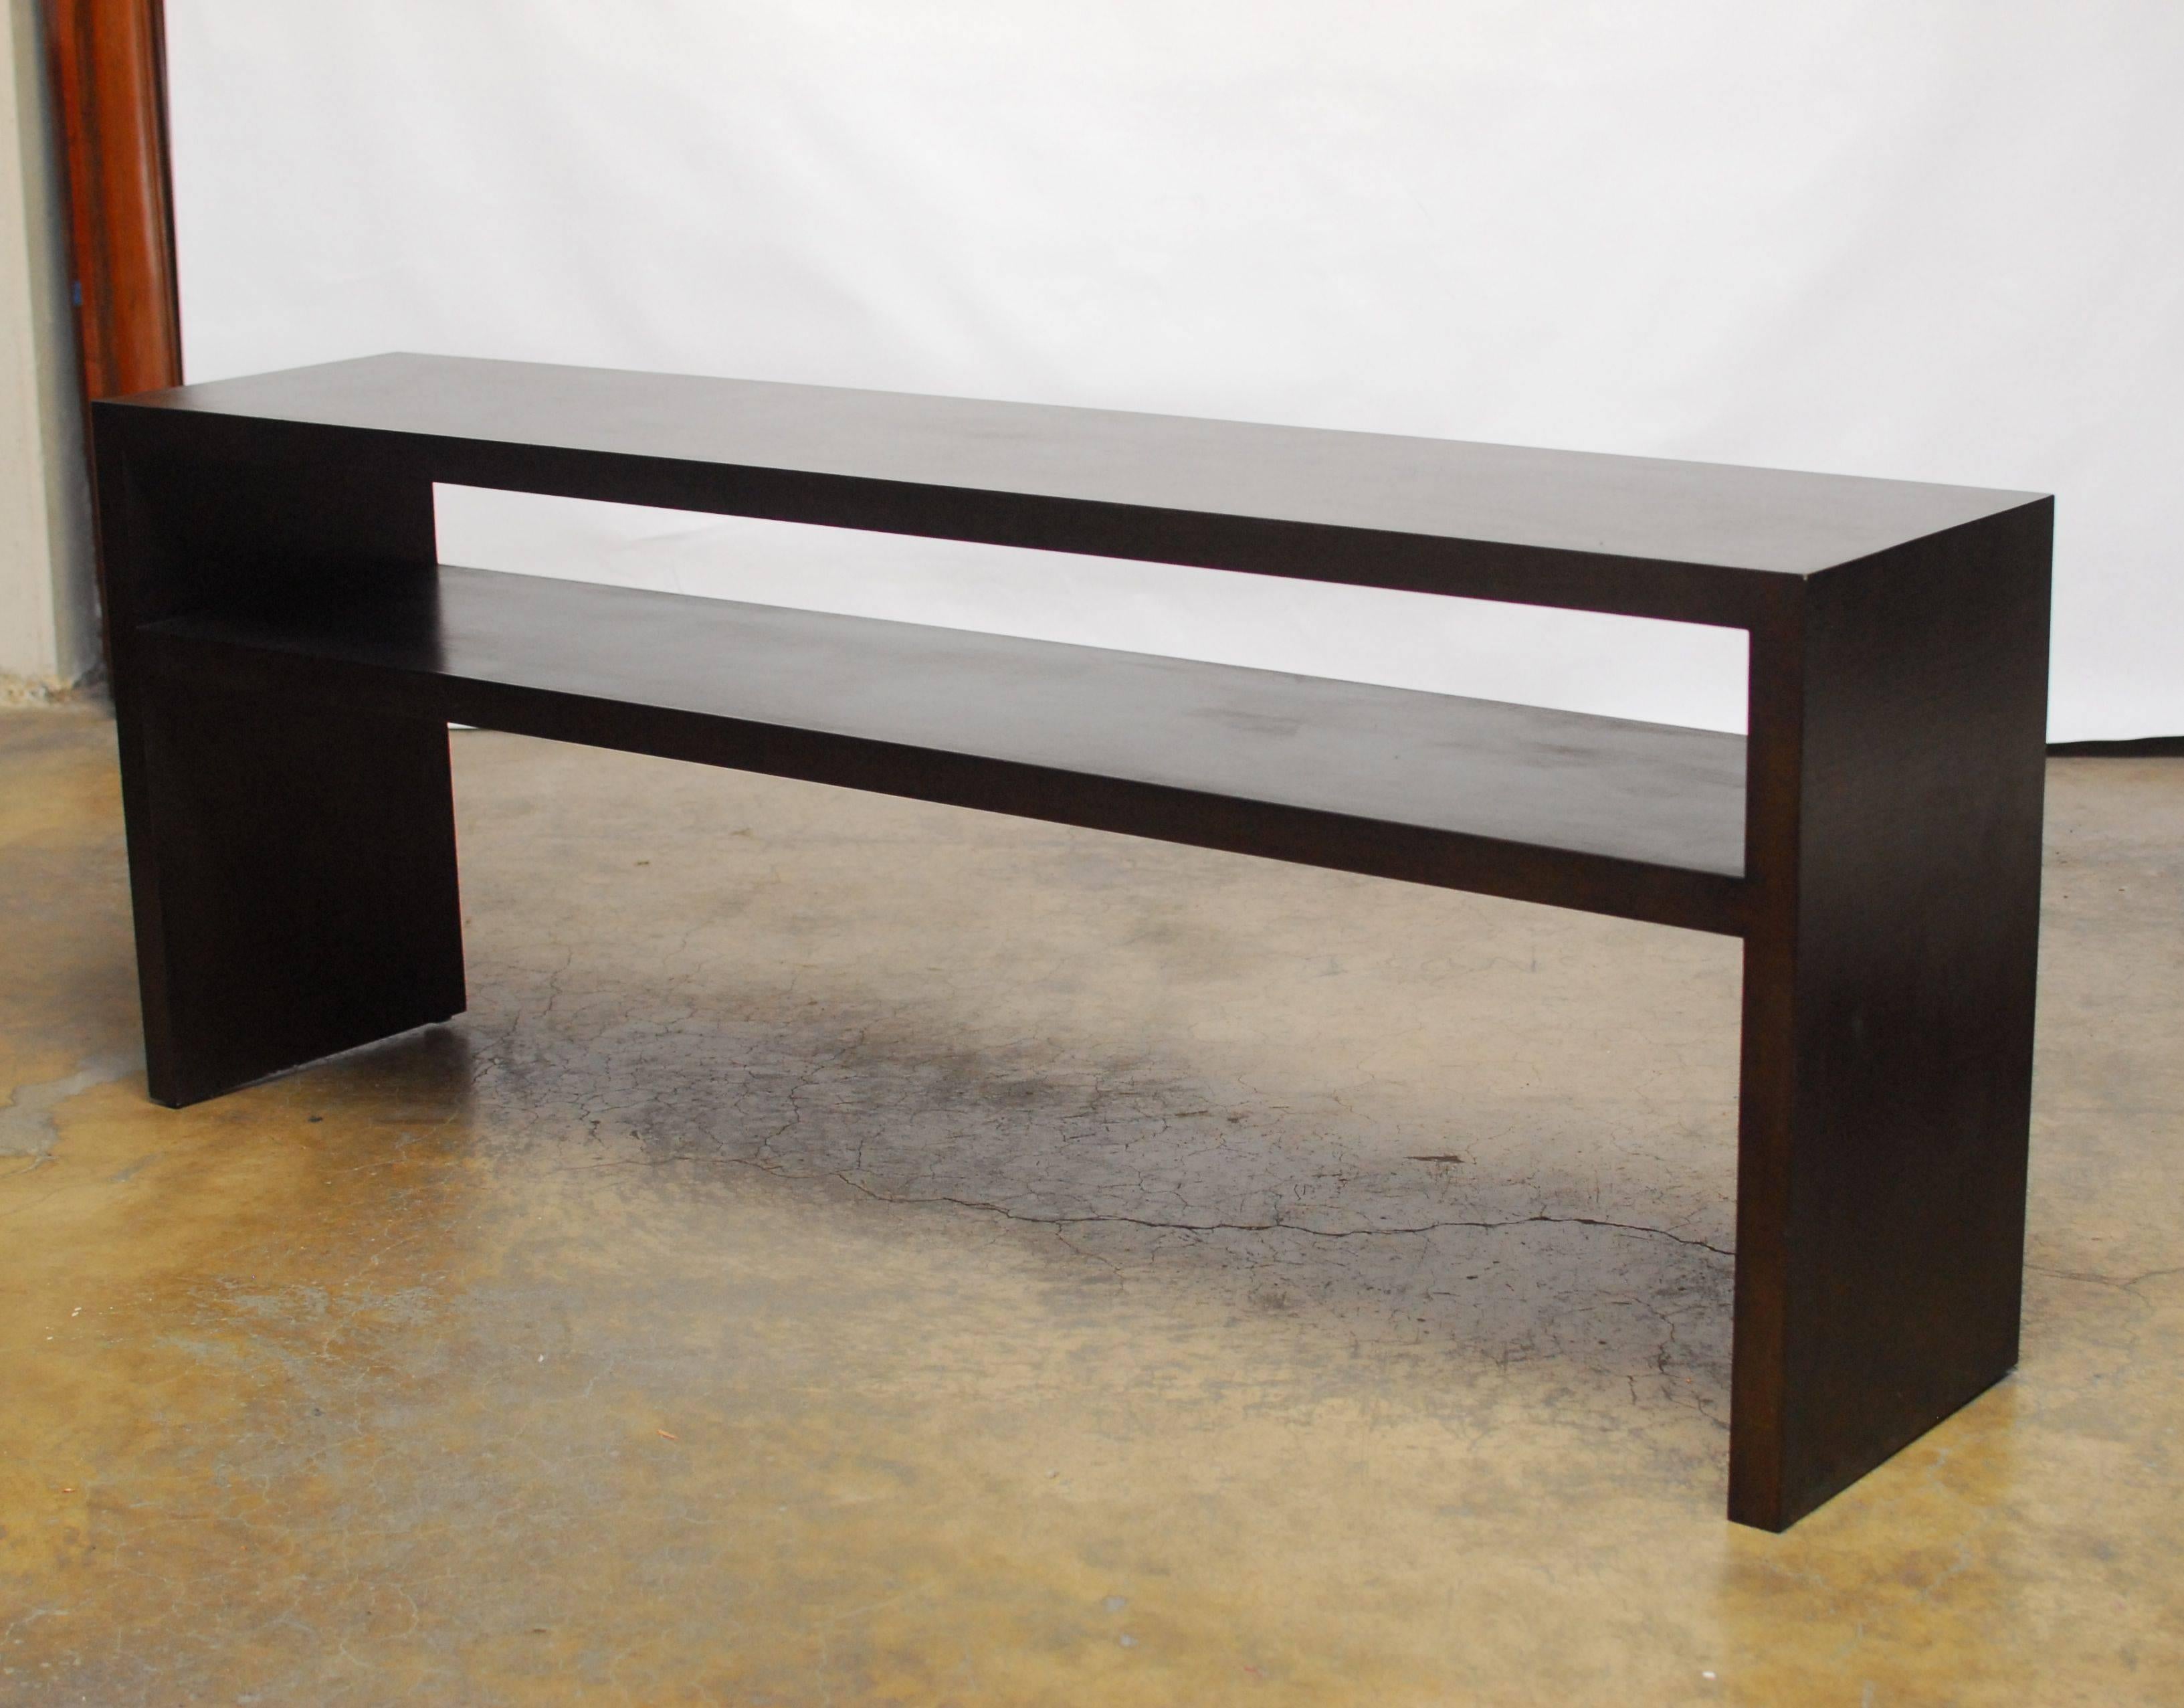 Large, Modern Parson's style console table with a shelf featuring a sleek, minimalist style and covered with a distinctive textured grasscloth veneer. Extra long sofa table features a wooden frame and is finished is rich, dark espresso.

